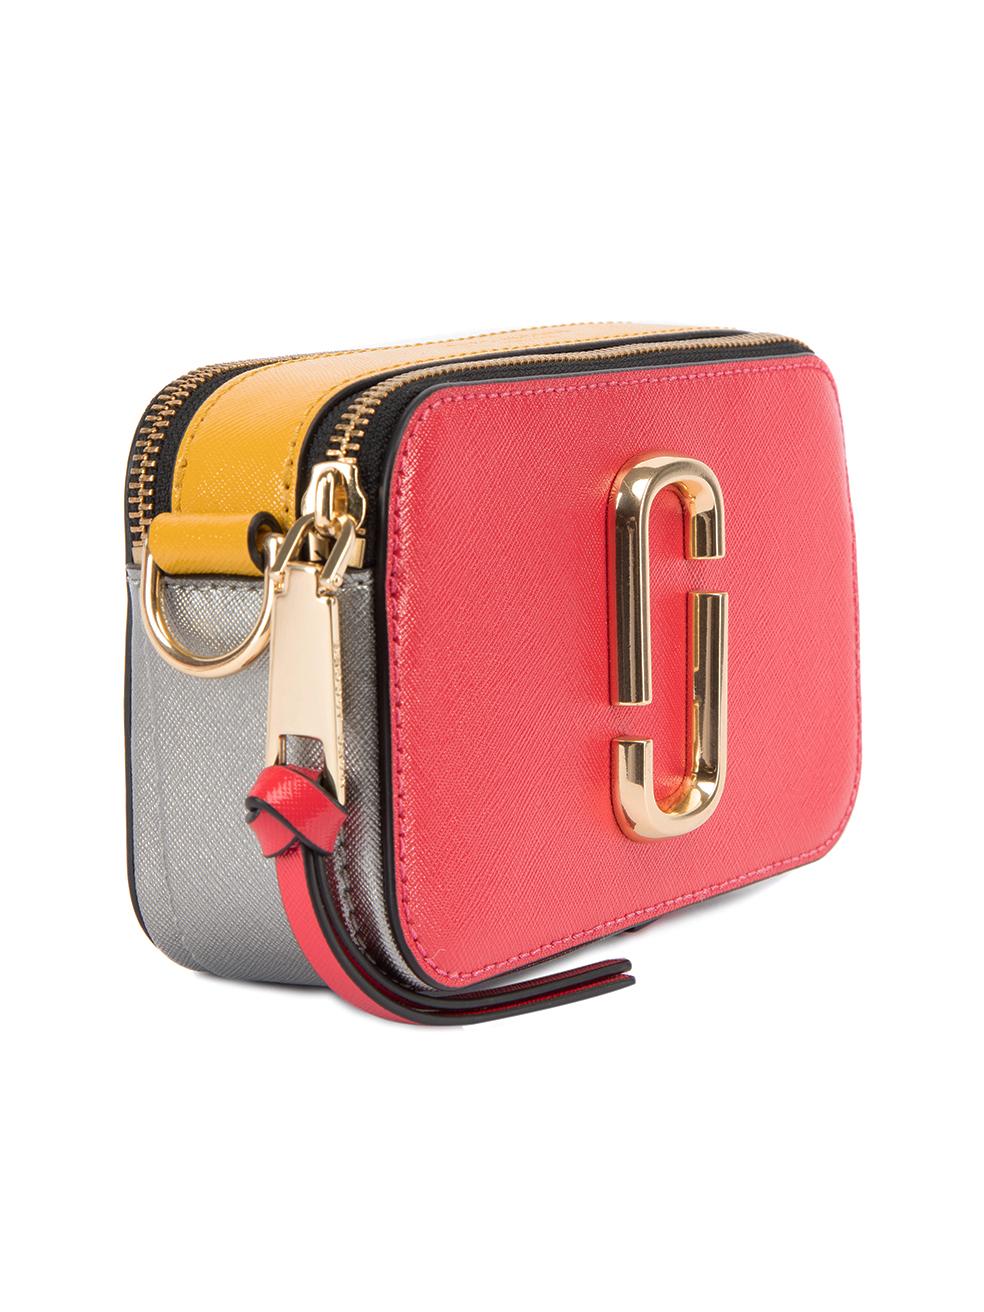 CONDITION is Never worn. No visible wear to bag is evident on this used Marc Jacobs designer resale item. Details Multicolour- Red, yellow and silver Leather Mini crossbody bag Dual zip fastening 1x Detachable and adjustable rainbow and stars canvas